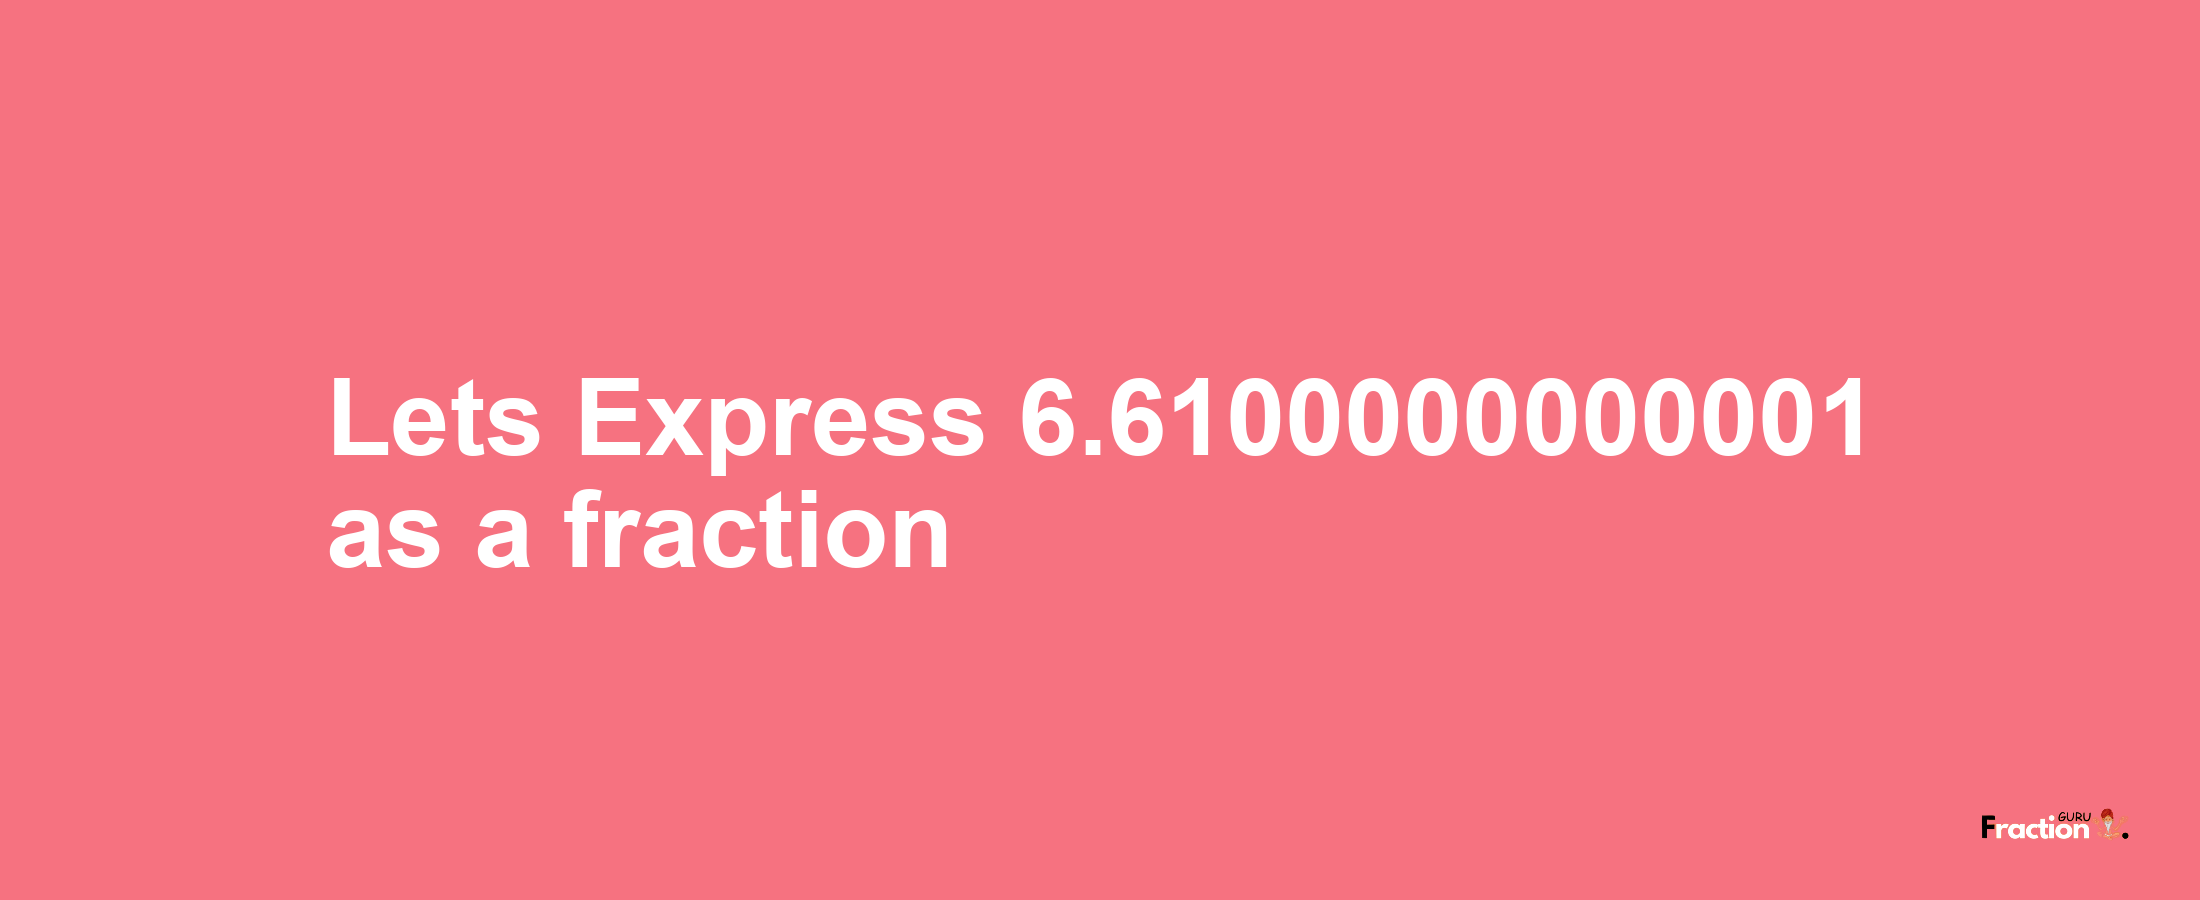 Lets Express 6.6100000000001 as afraction